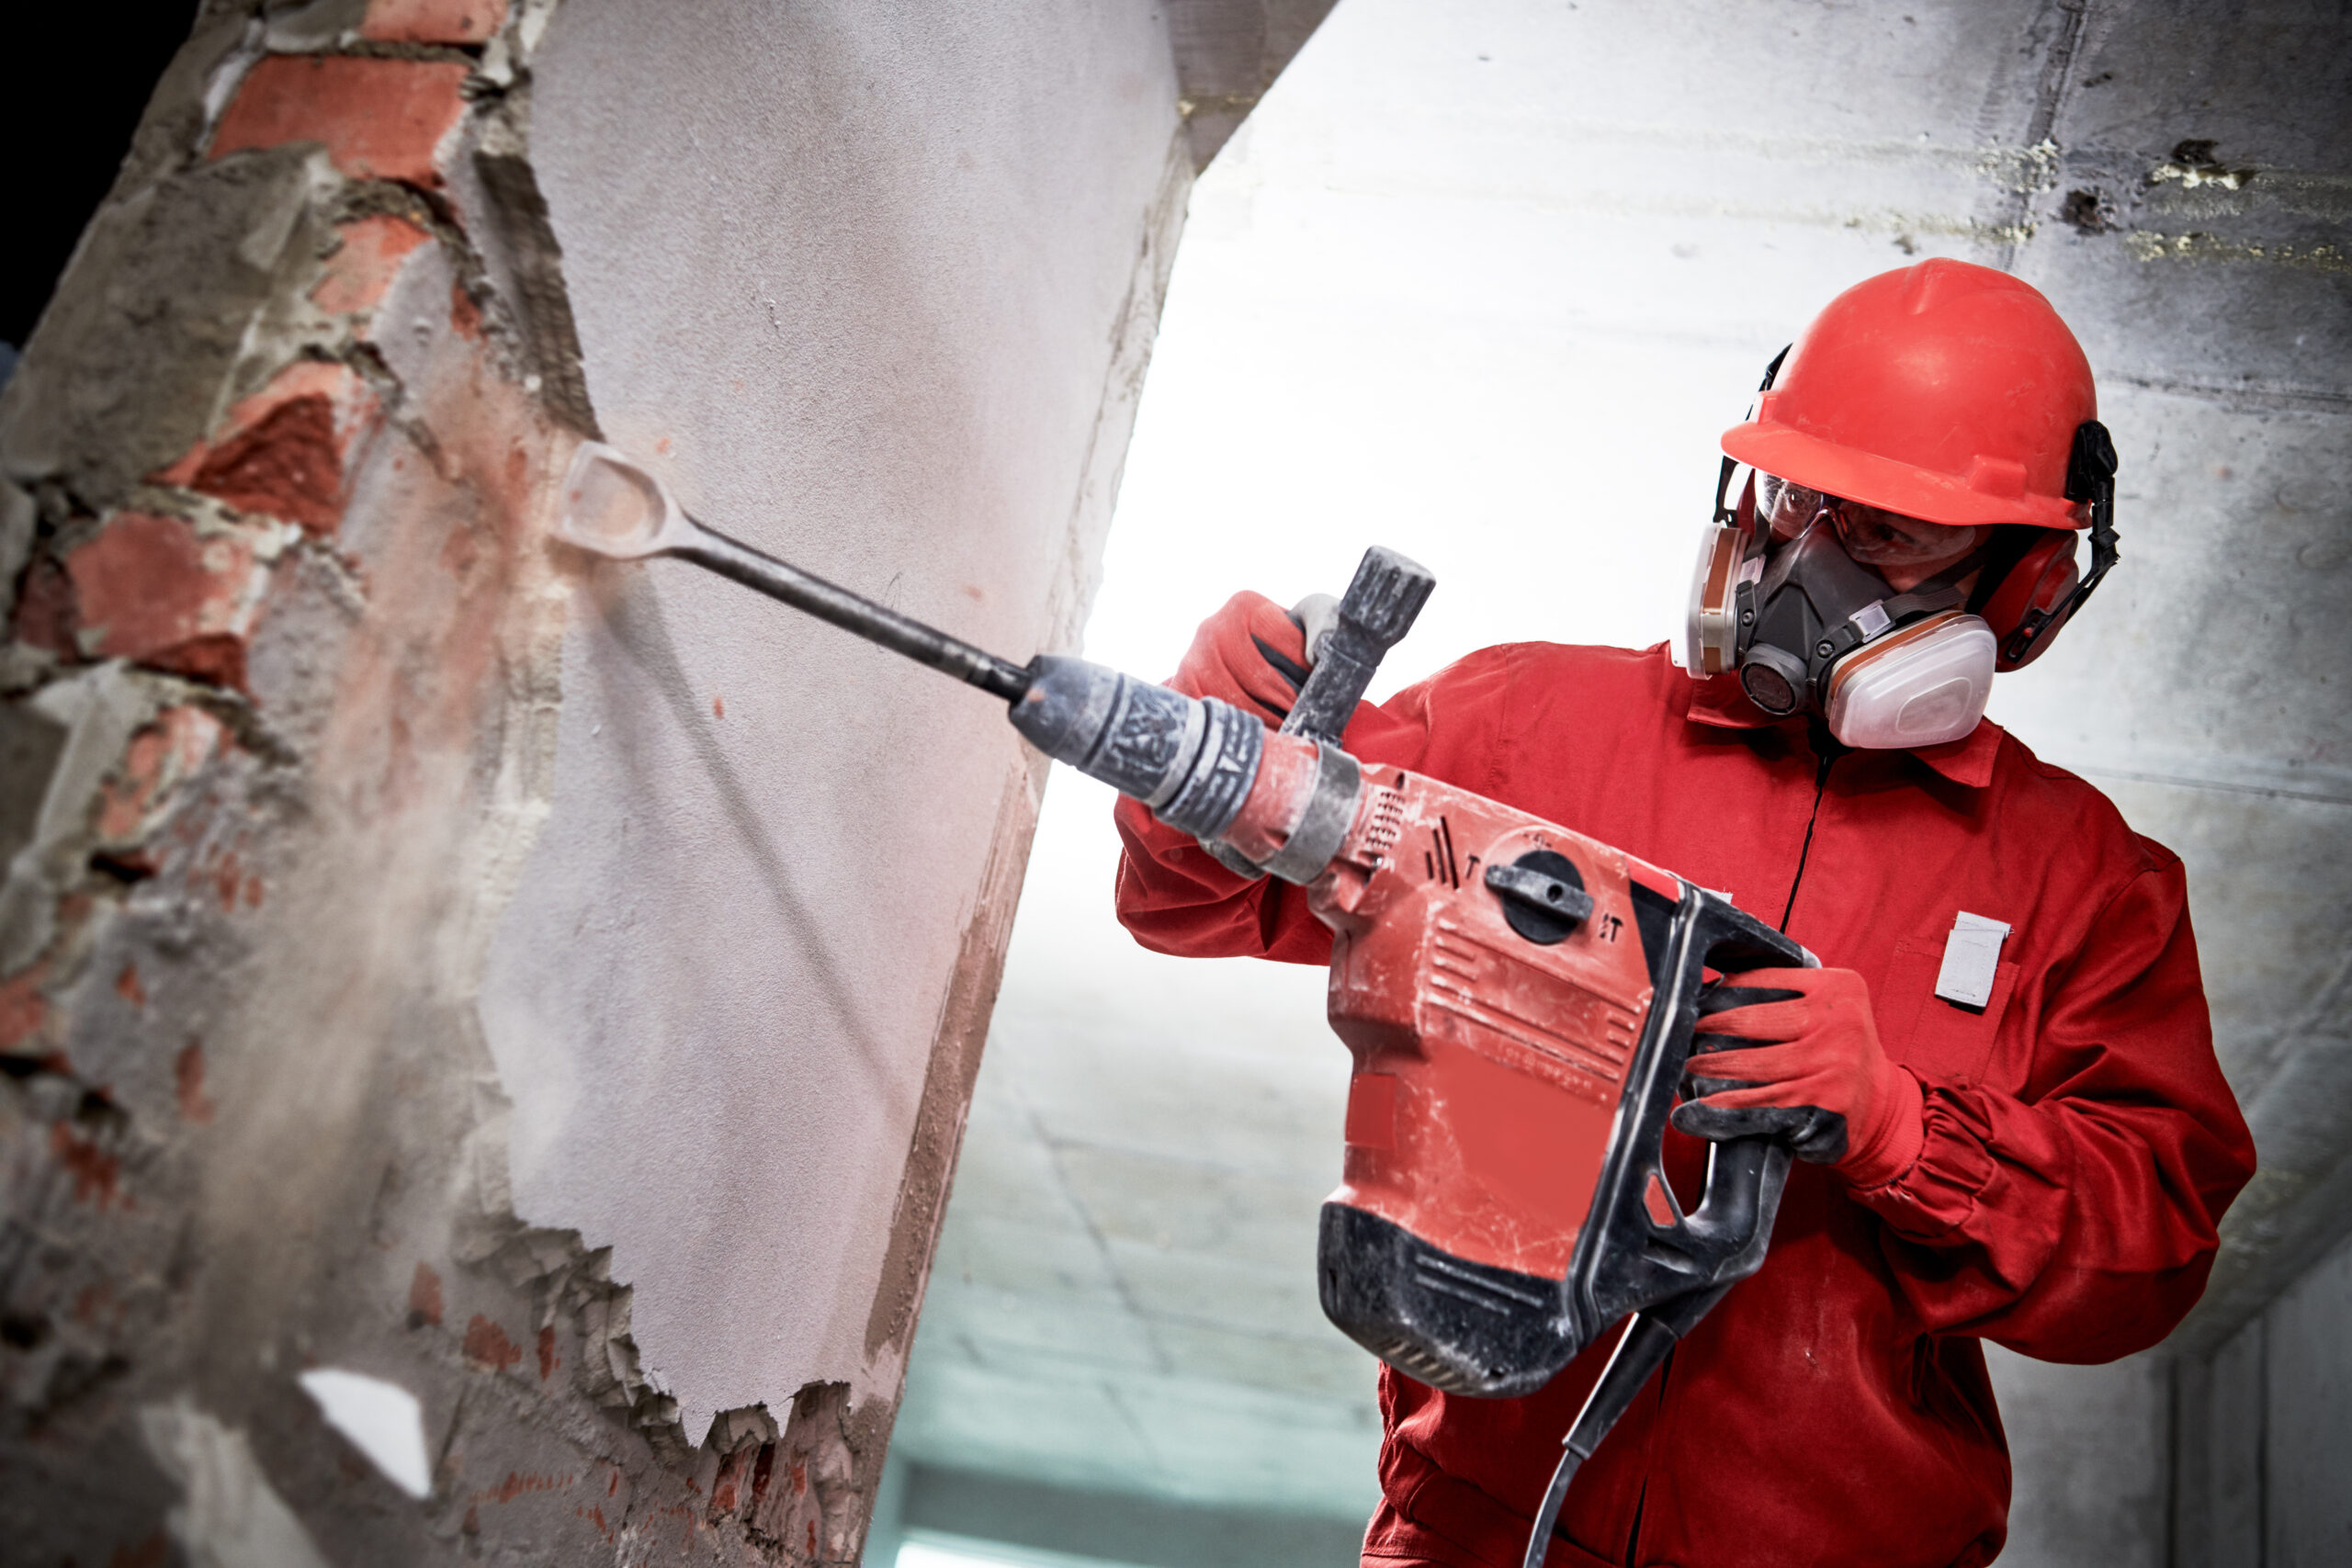 Demolition and destroying. Worker with demolition hammer in personal protection equipment removing interior brick wall plastering